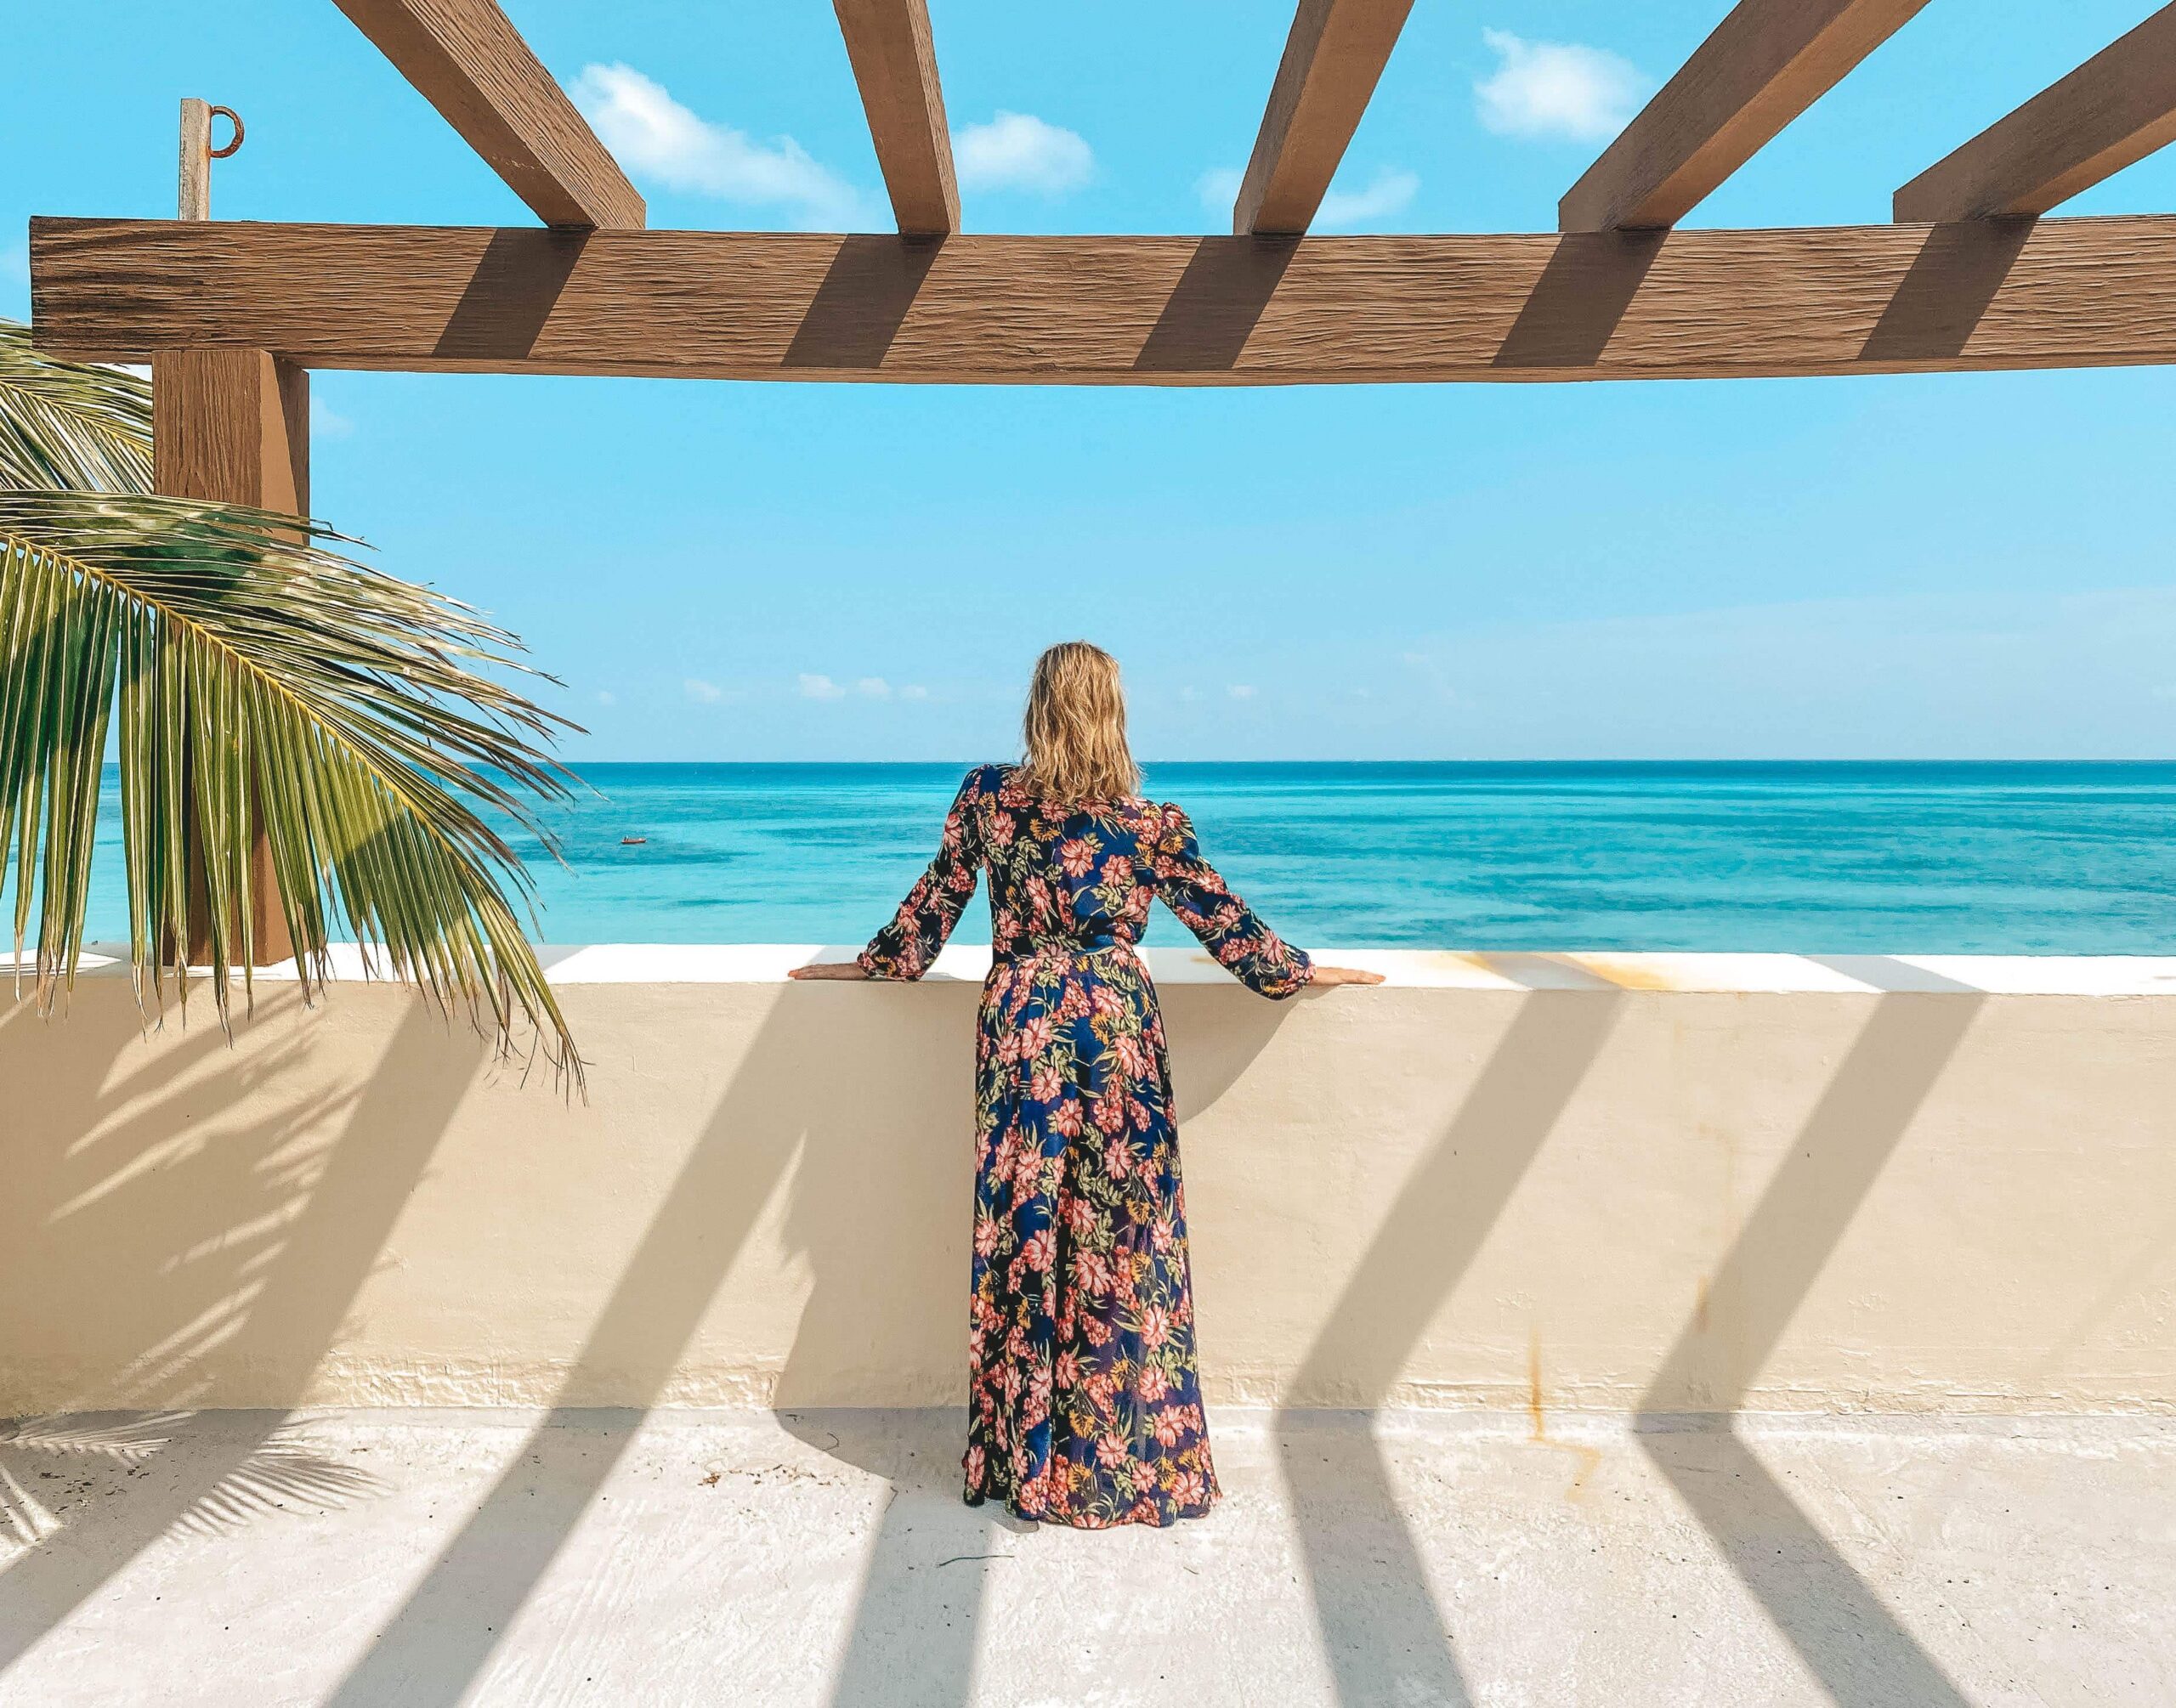 The Best Beach Clubs In Playa Del Carmen To Visit In 2021